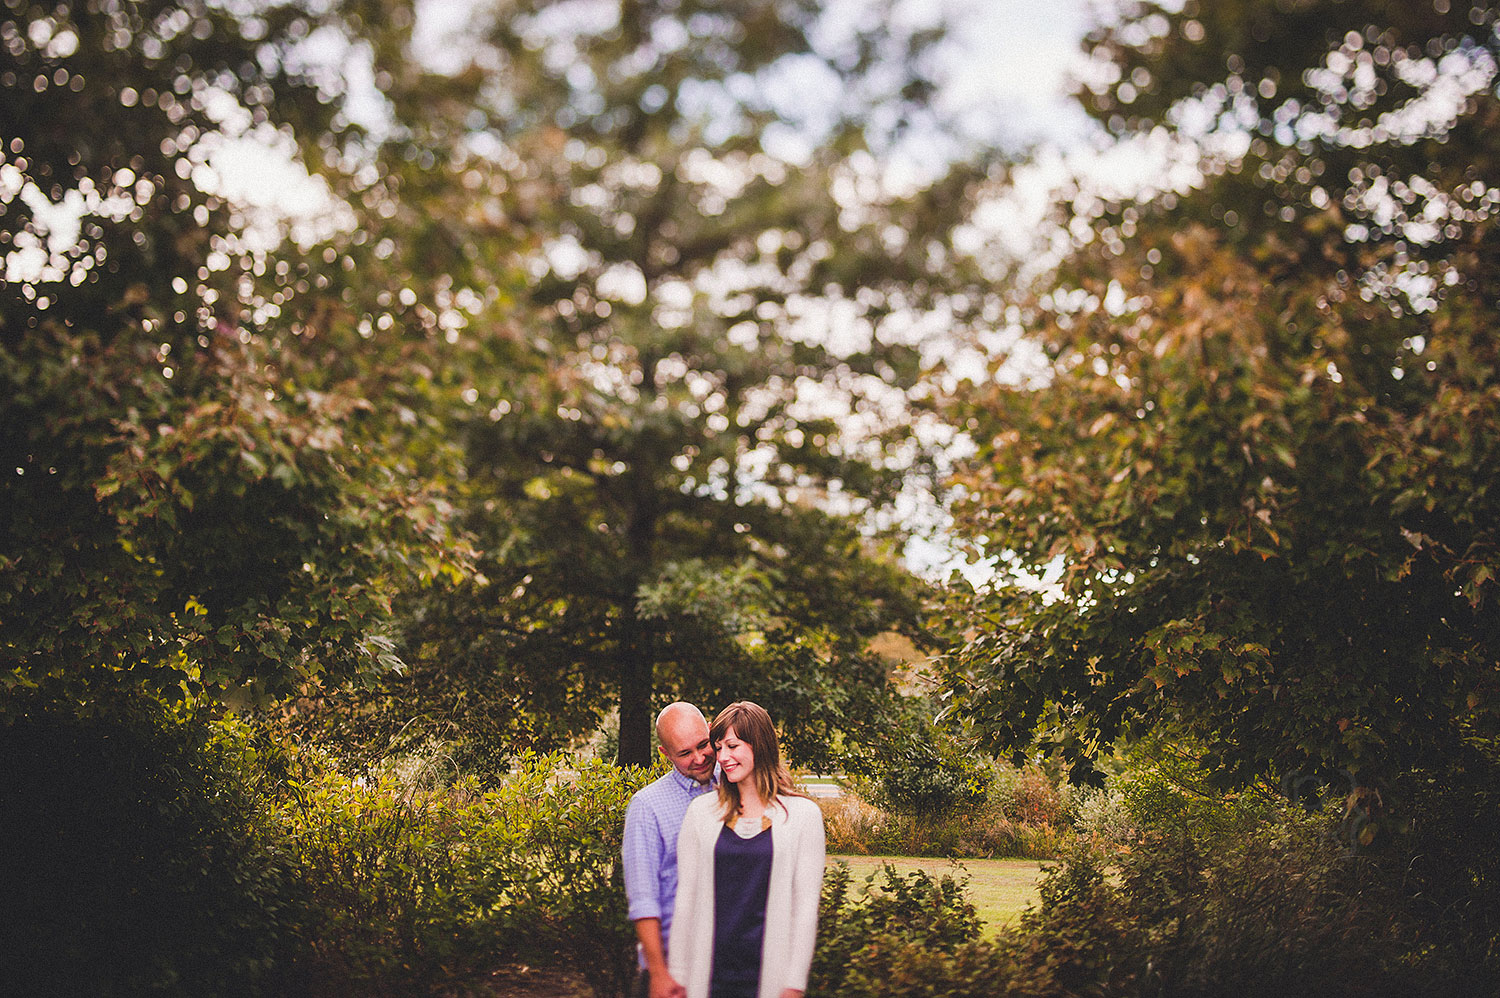 pat-robinson-photography-wilmington-engagement-session-2-2.jpg